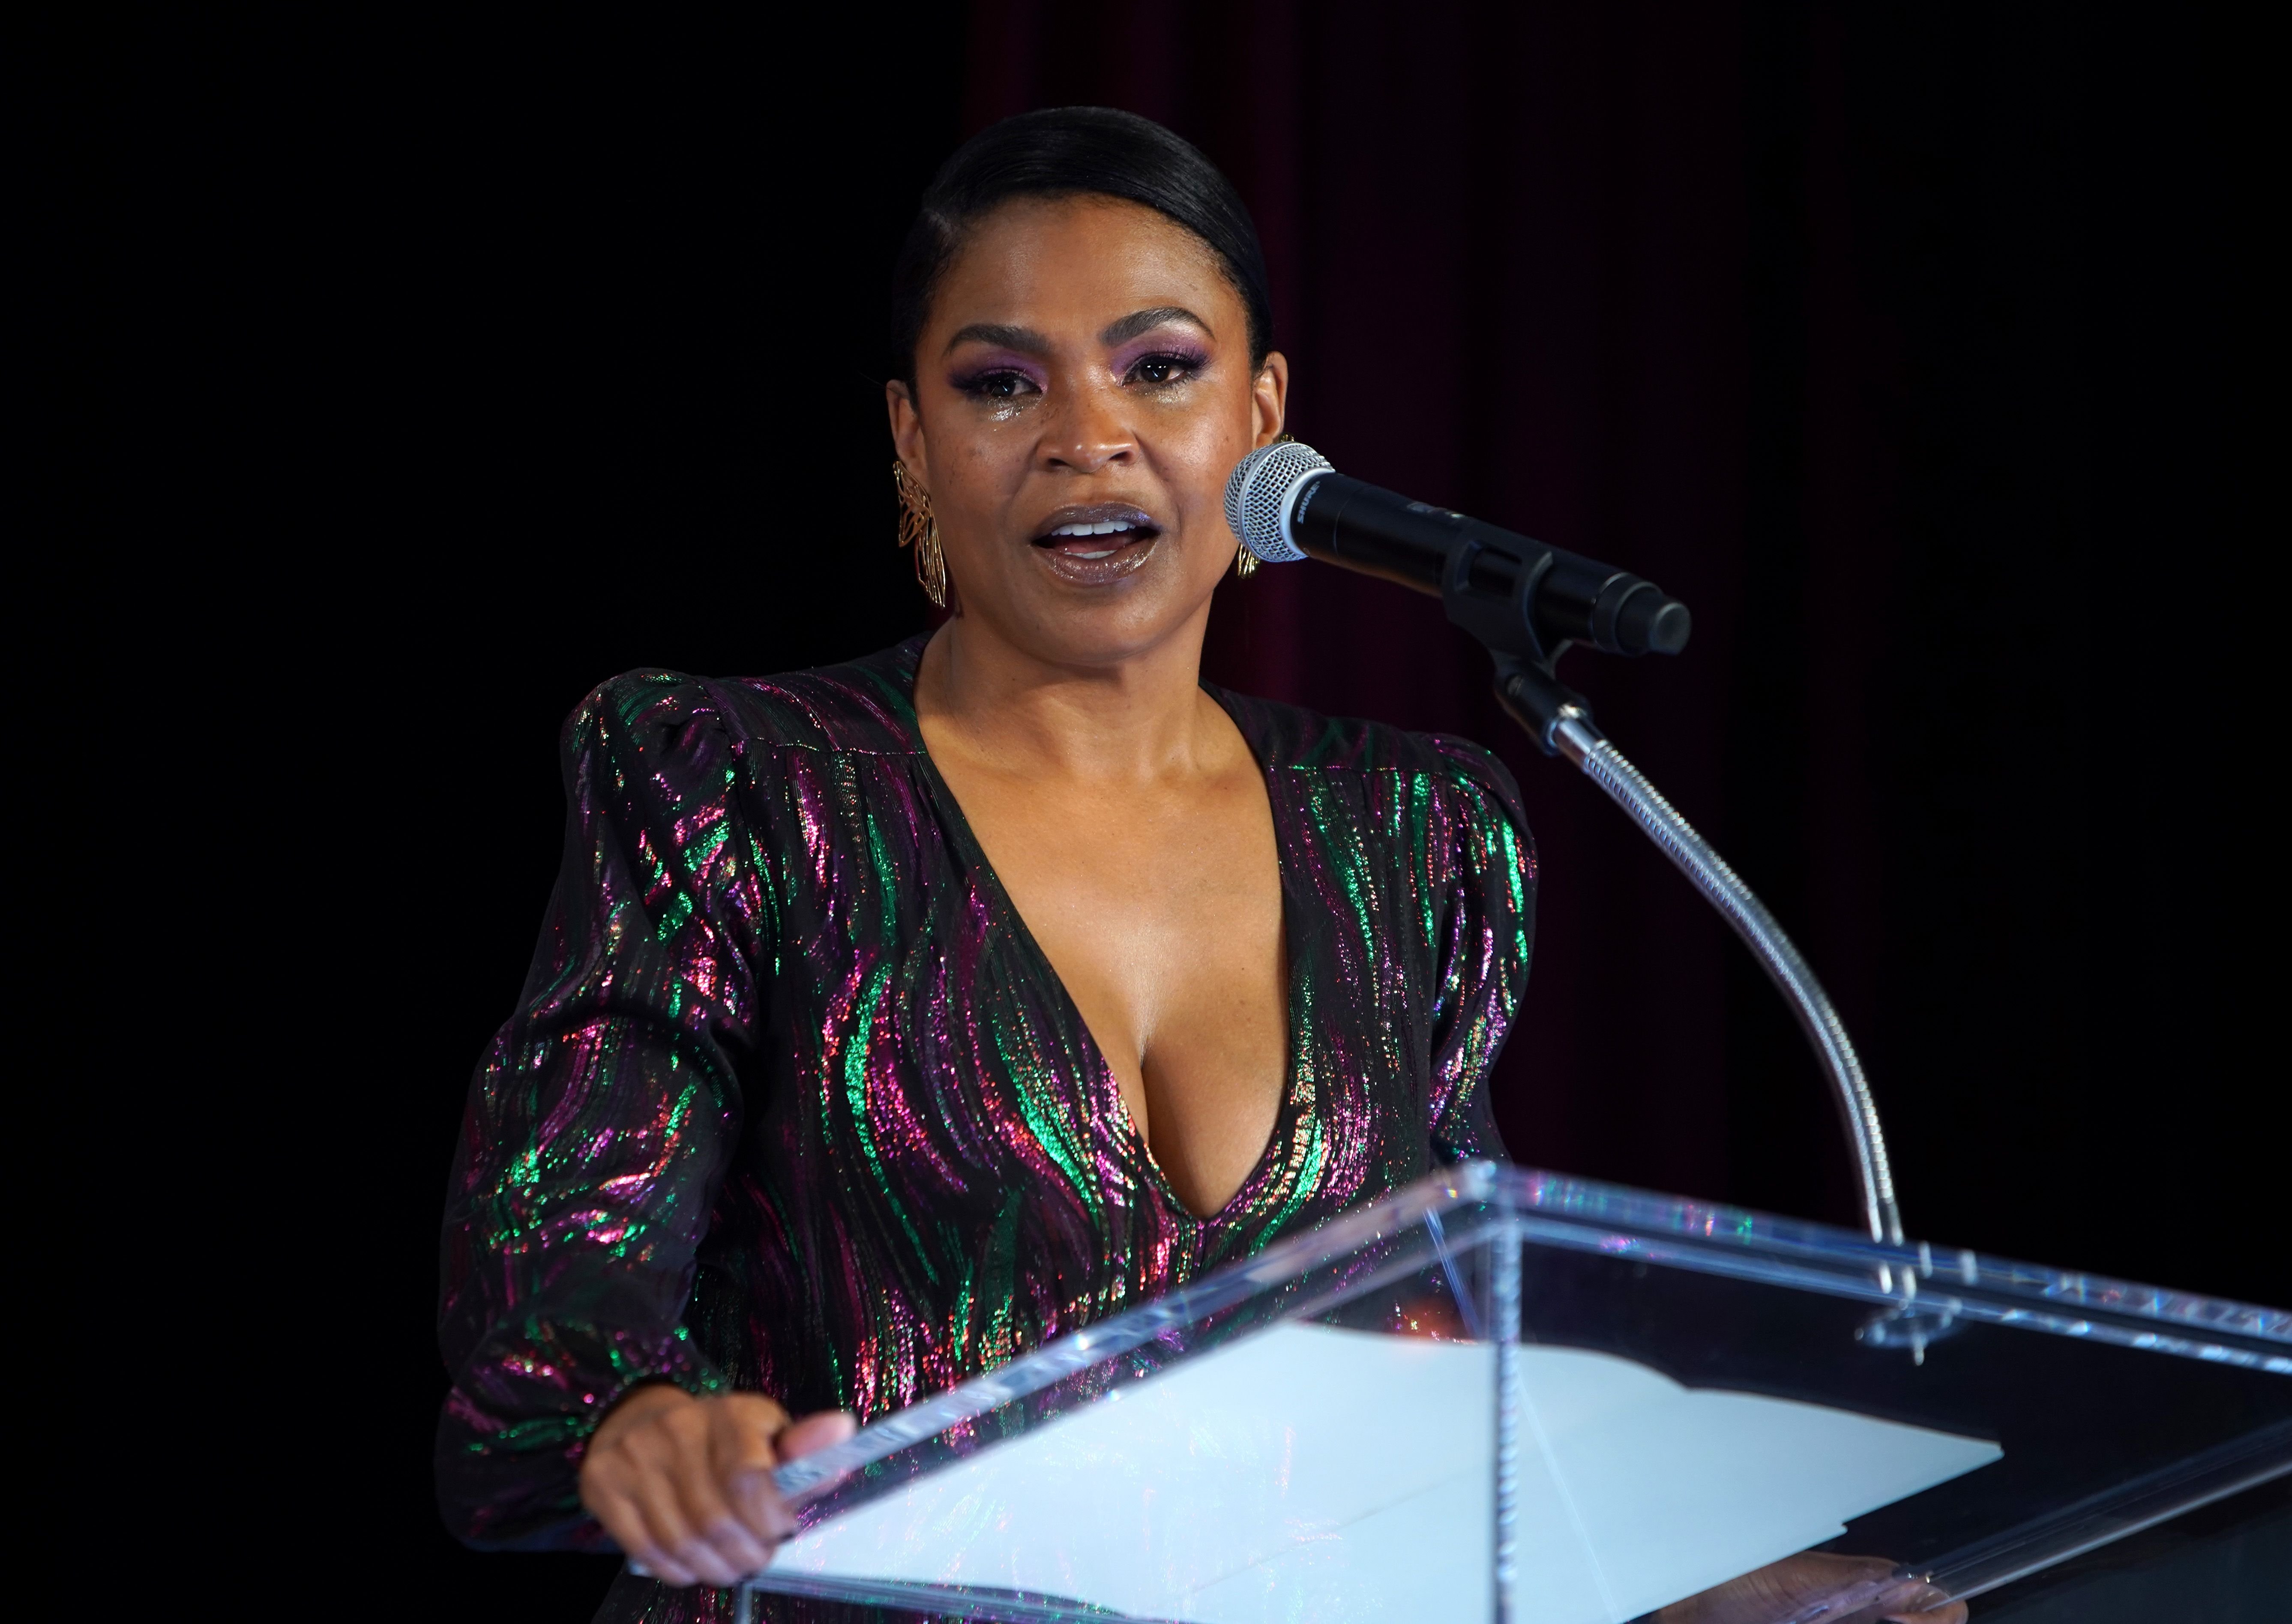 Nia Long speaks at the Celebration of Black Cinema in December 2019 in Los Angeles | Source: Getty Images